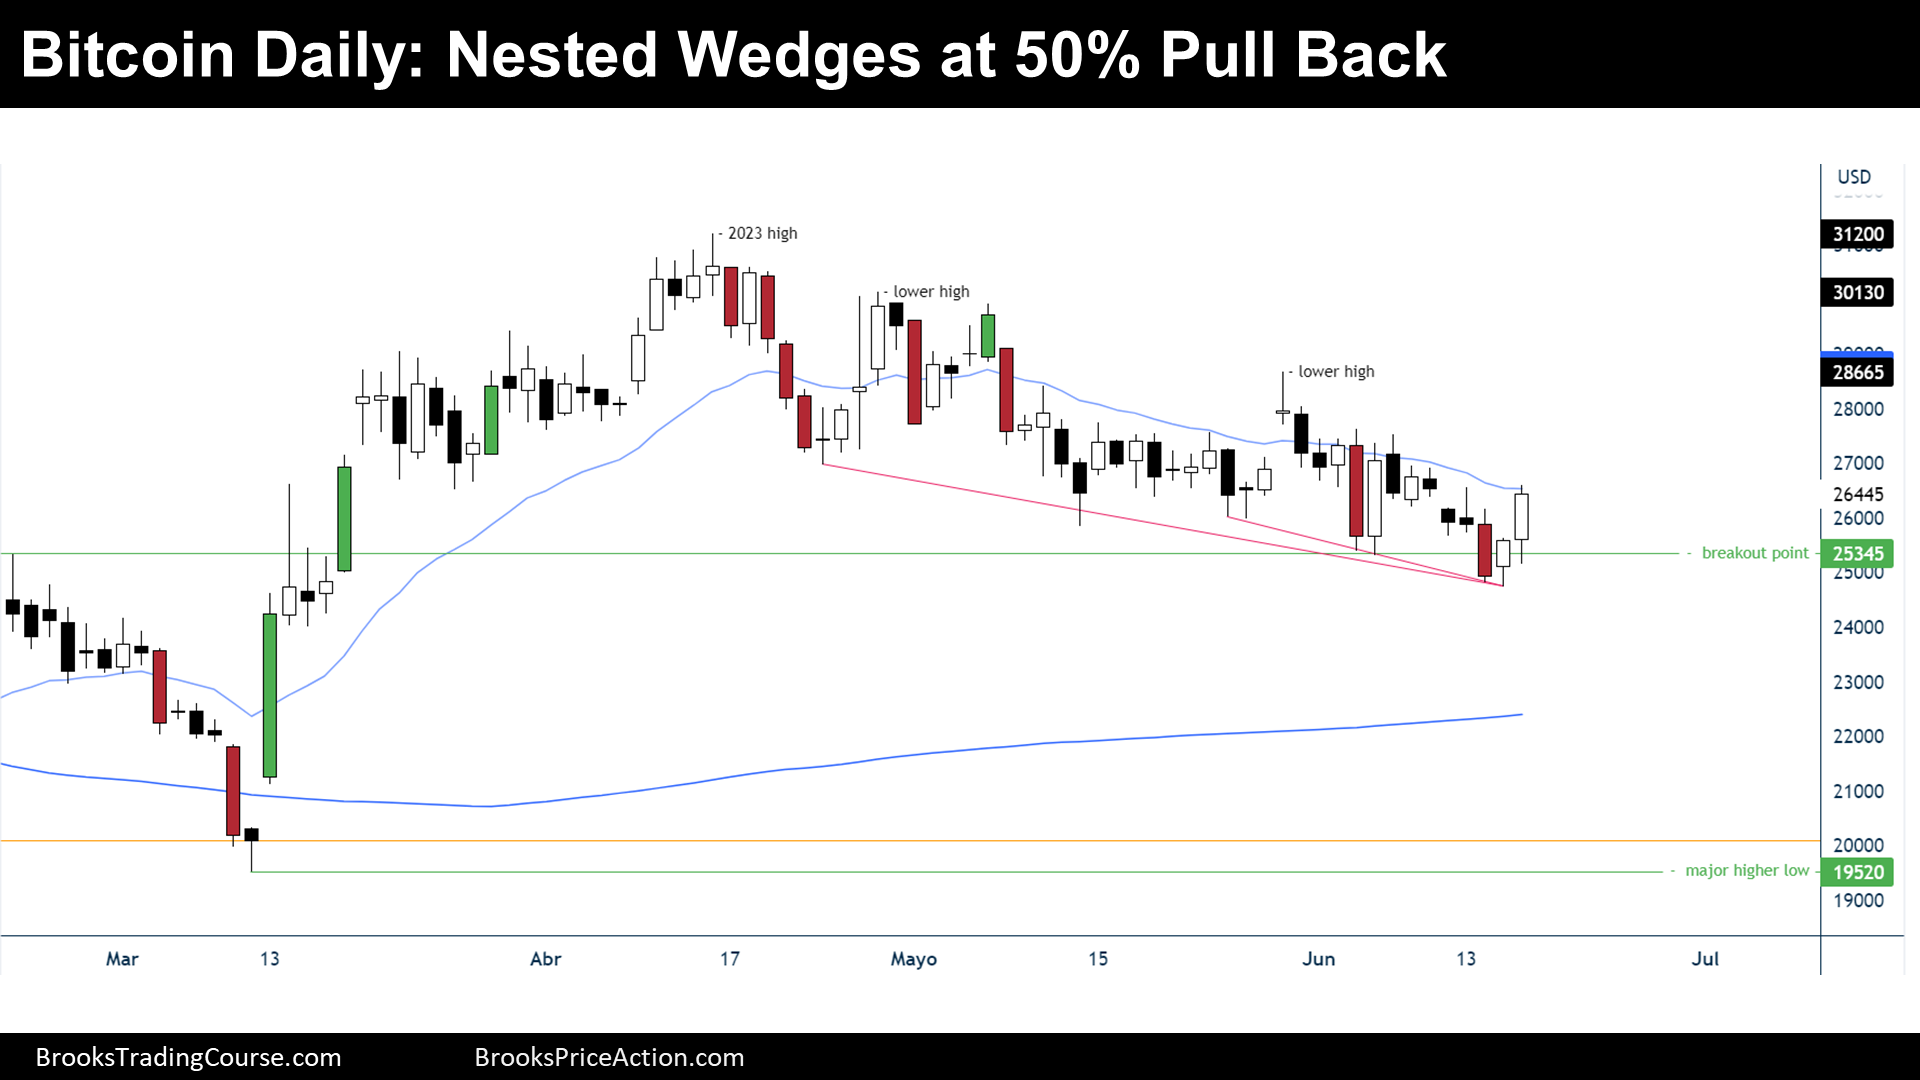 Bitcoin Nested Wedge surge from Support